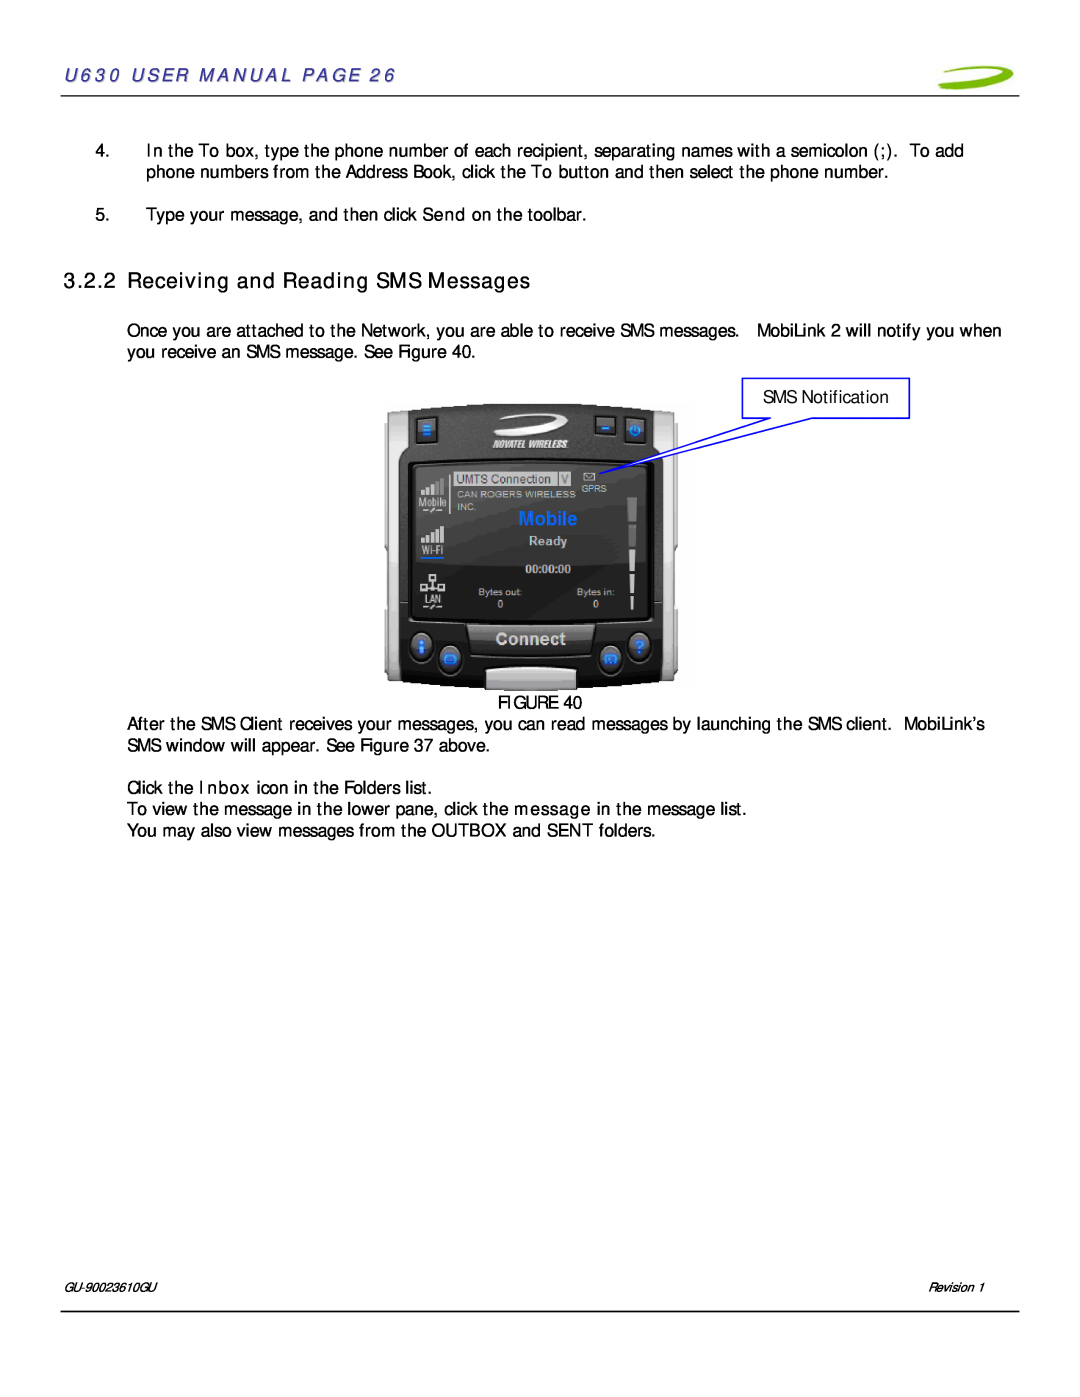 InFocus user manual Receiving and Reading SMS Messages, U630 USER MANUAL PAGE 